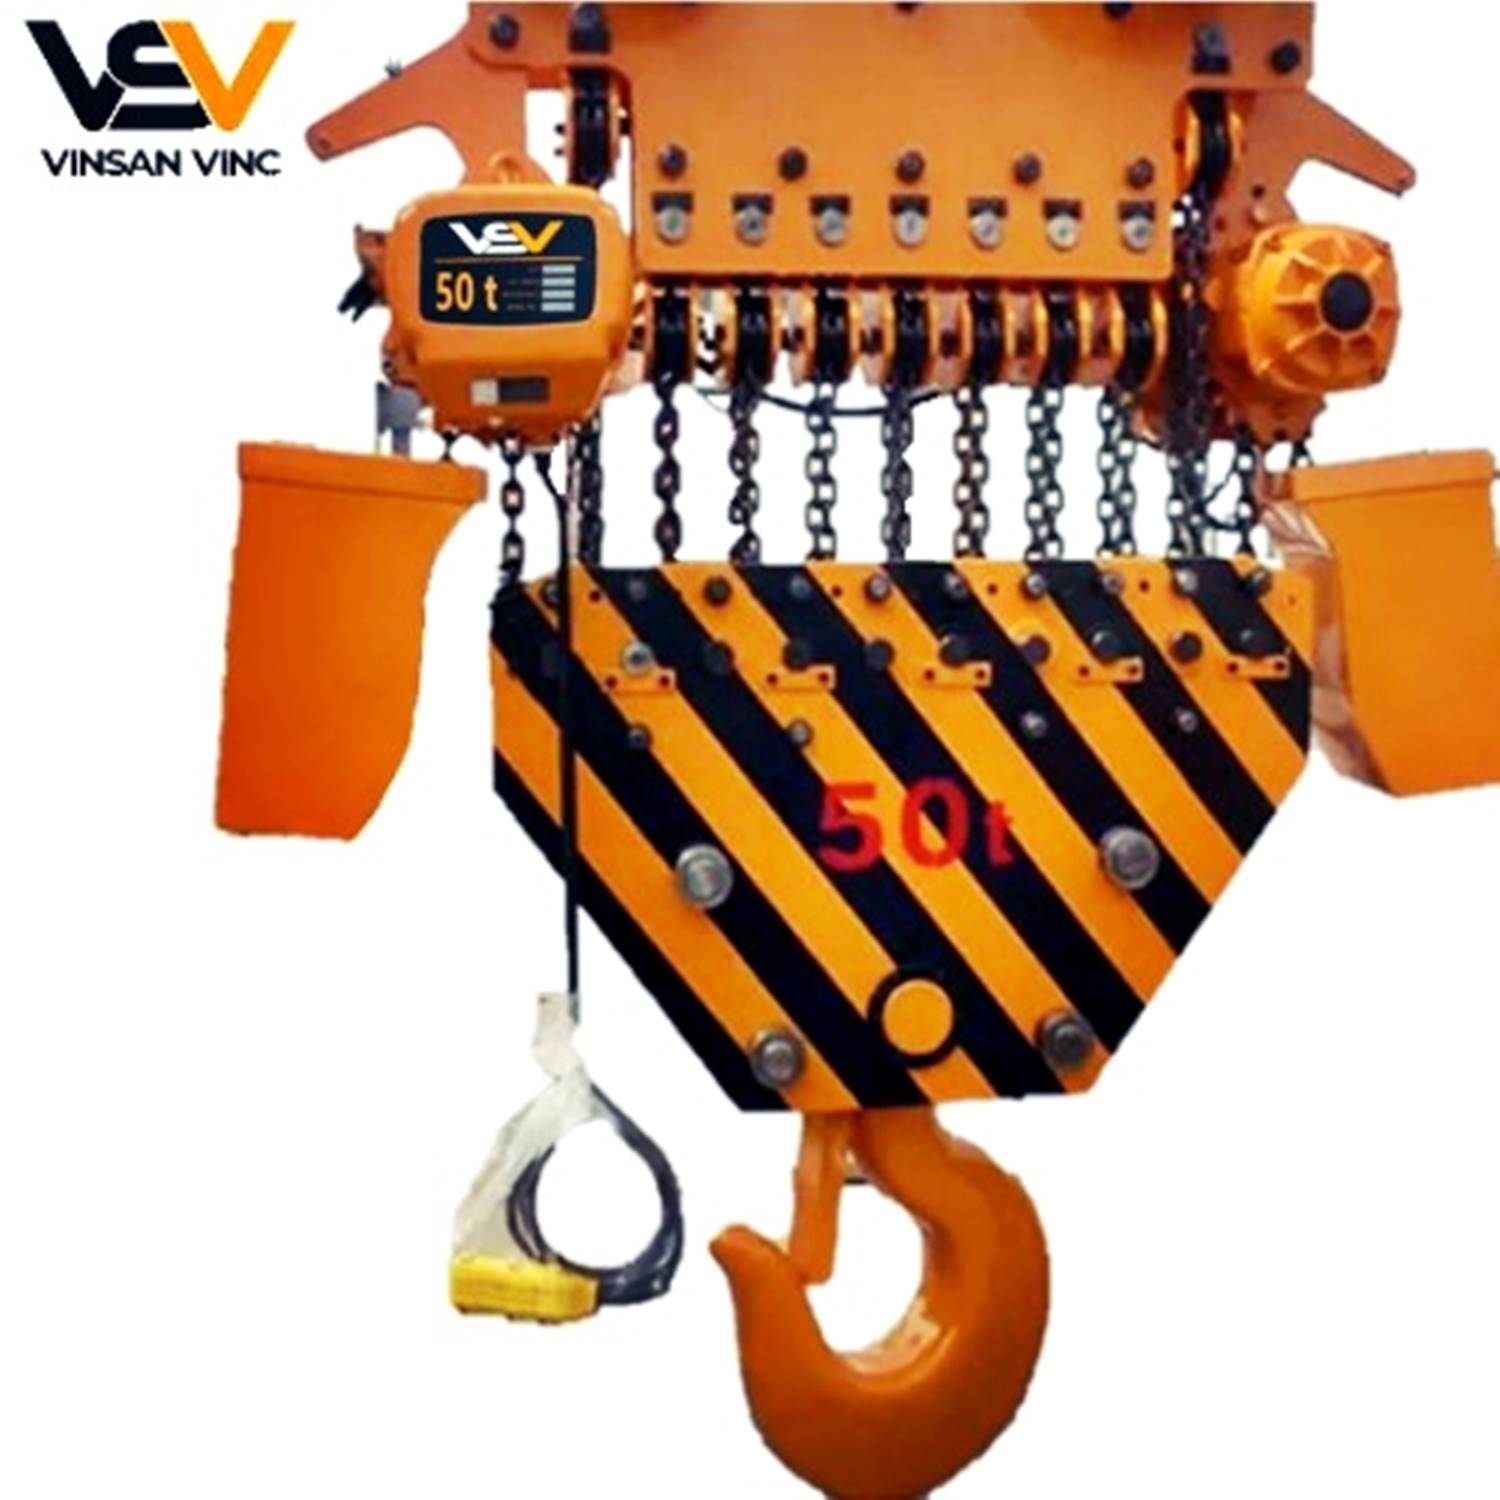 Fixed Suspension 2 Motion Double Speed Electric Chain Hoist